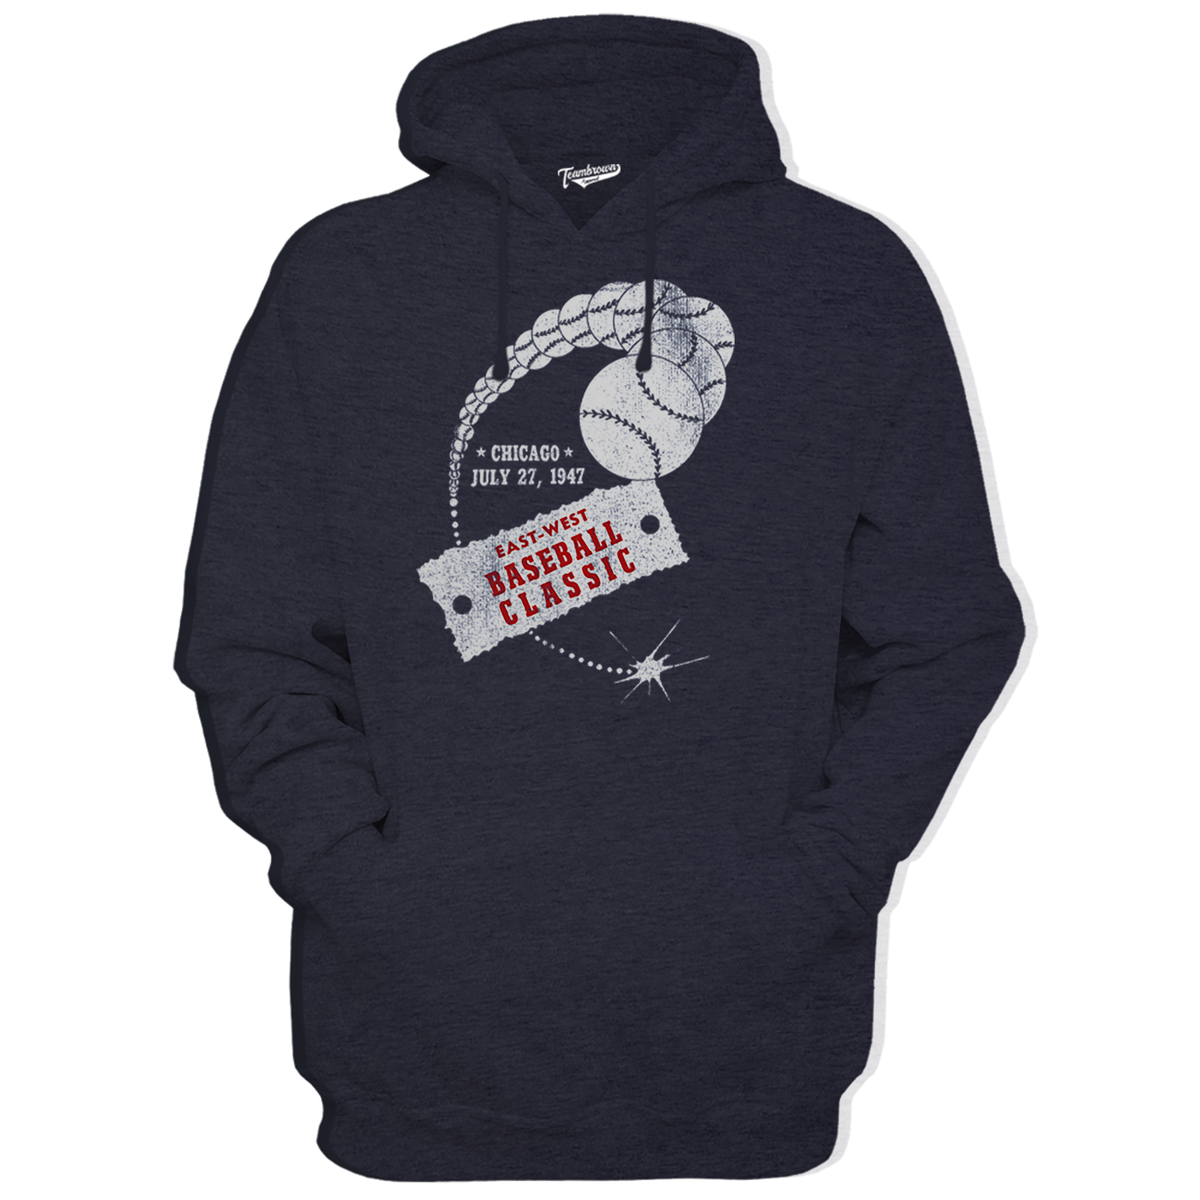 1947 East West Baseball Classic - Unisex Premium Hoodie | Officially Licensed - NLBM